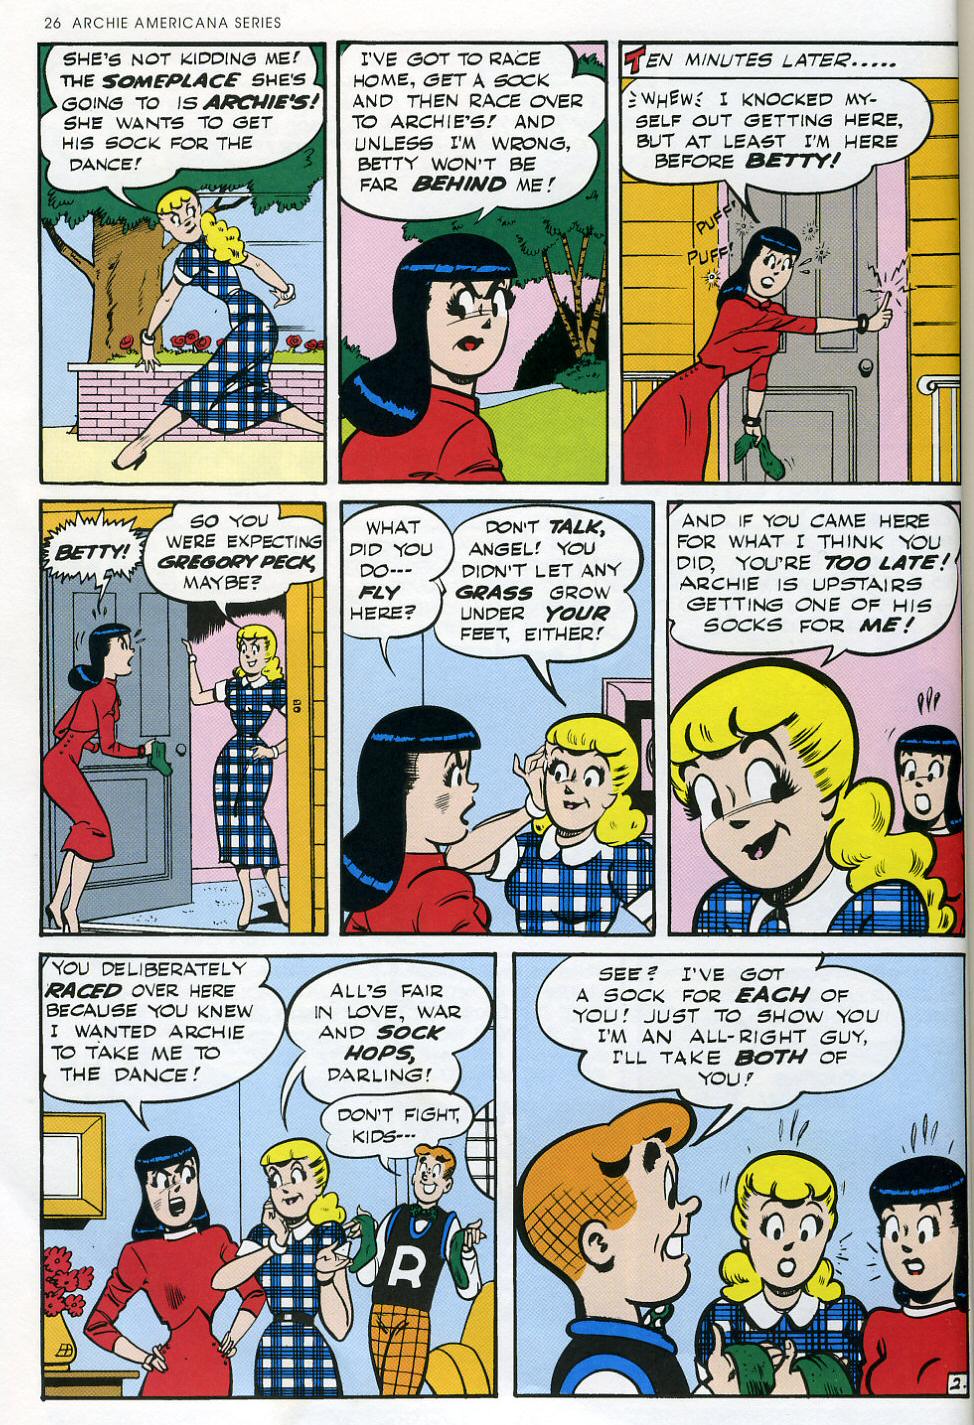 Read online Archie Americana Series comic -  Issue # TPB 2 - 28